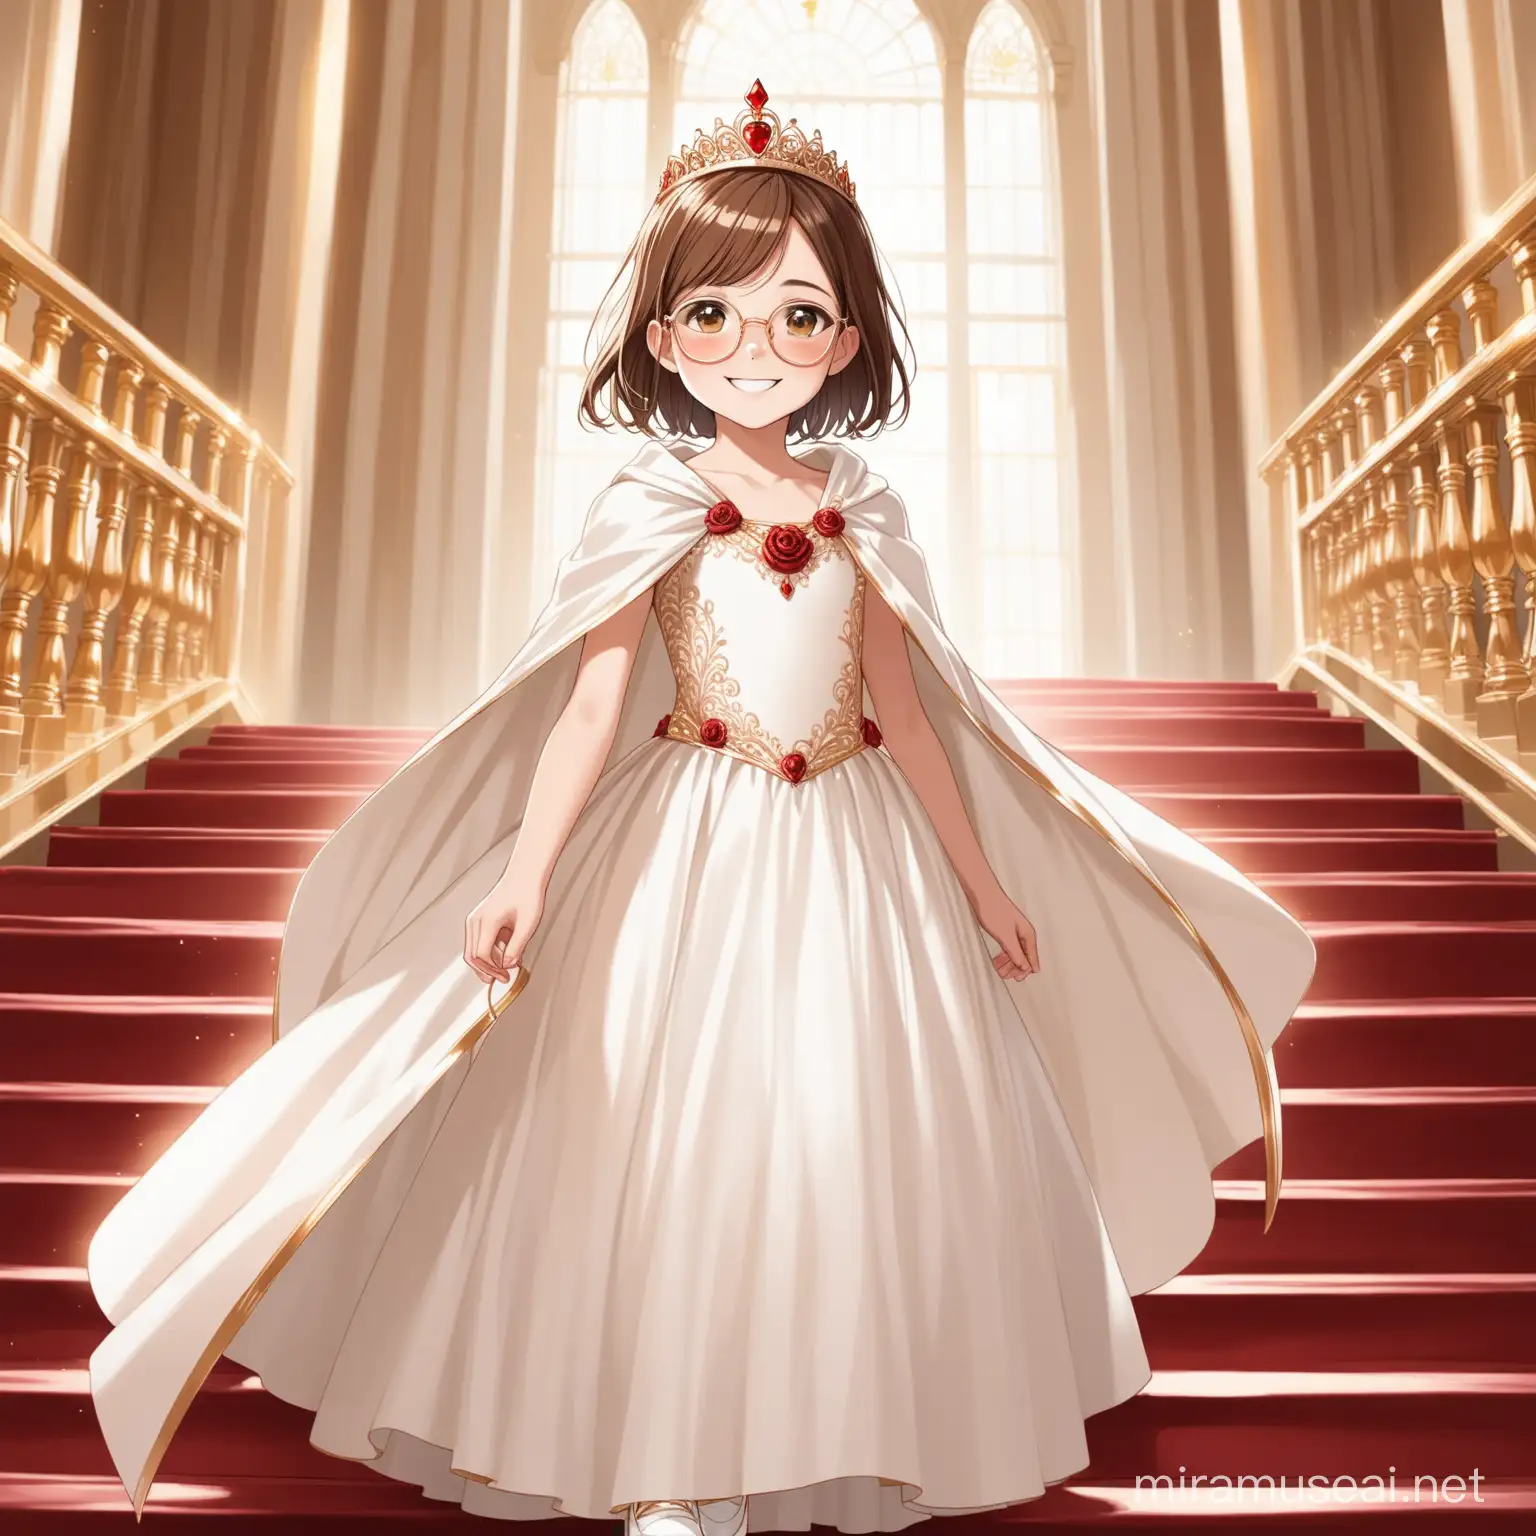 12 year old girl with short brown hair, brown eyes, rose gold glasses, smiling, wearing a long red and white ball gown, white shoes, gold tiara, wearing a white cape, walking down a grand staircase